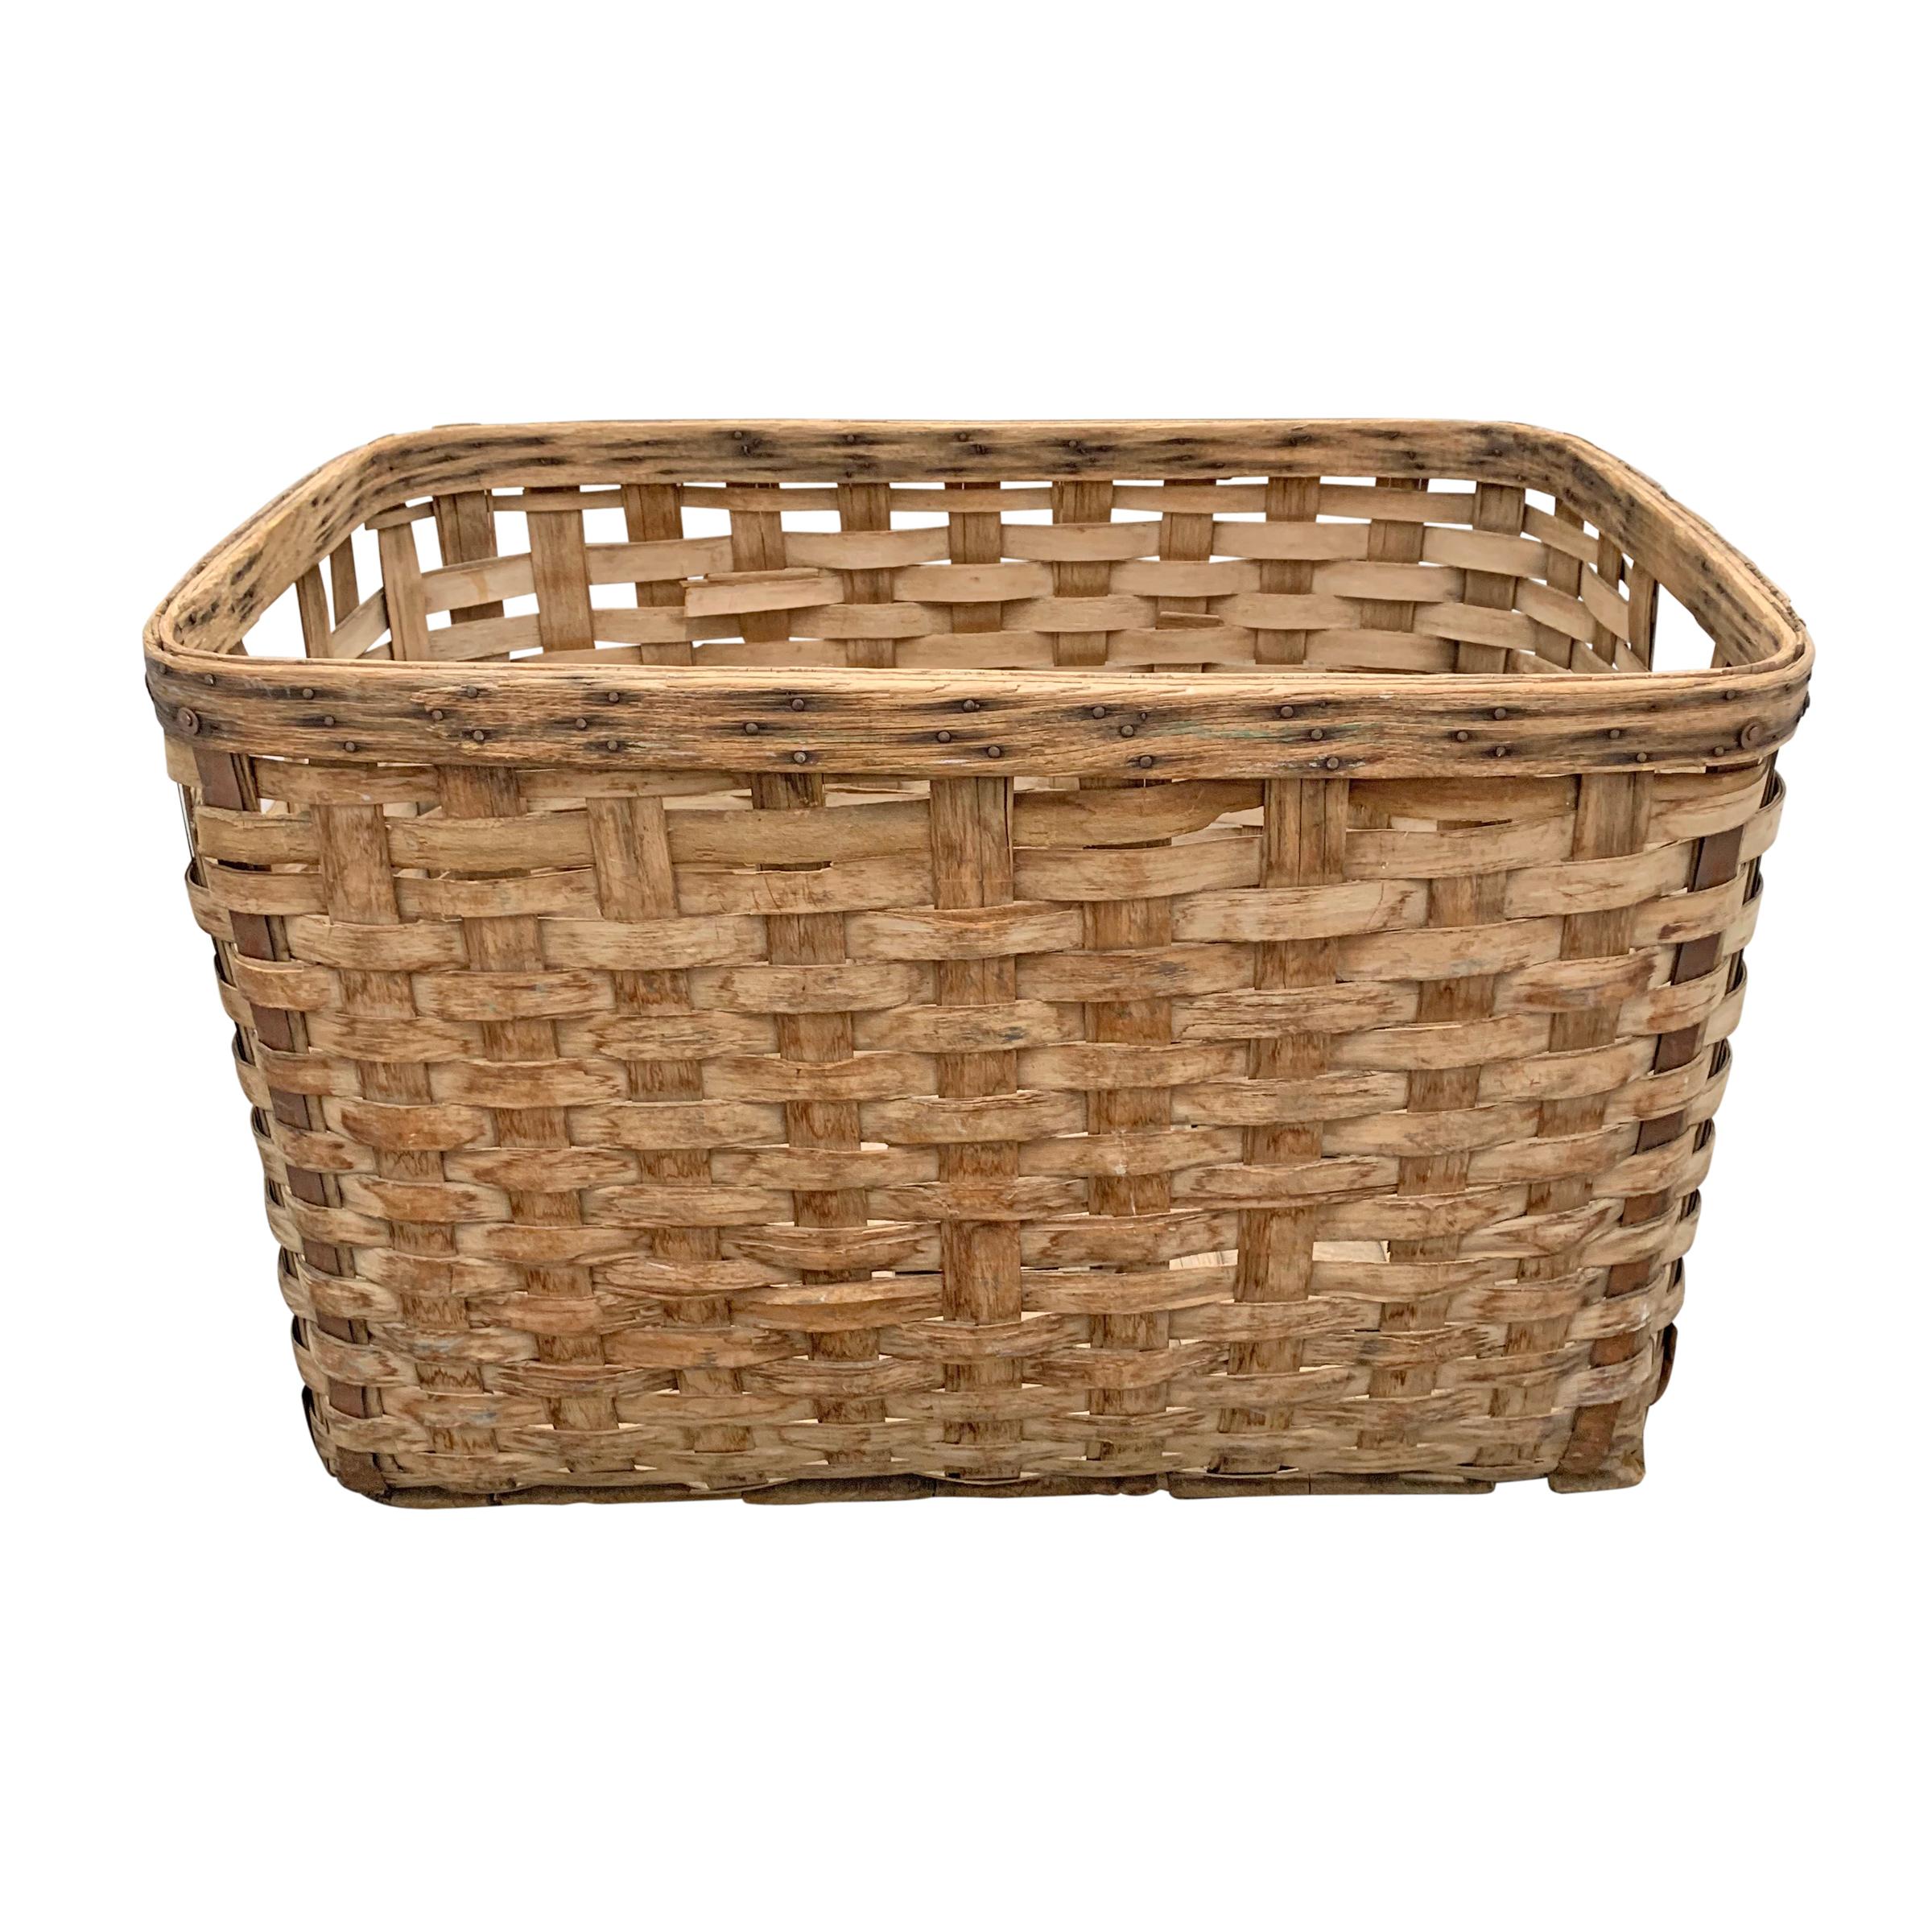 A large 19th century American oak splint shipping basket with a heavy double-banded rim, iron reinforcements on each corner, and two wooden runners across the bottom, all for added stability in shipping. Perfect for firewood, dogs toys, or anything